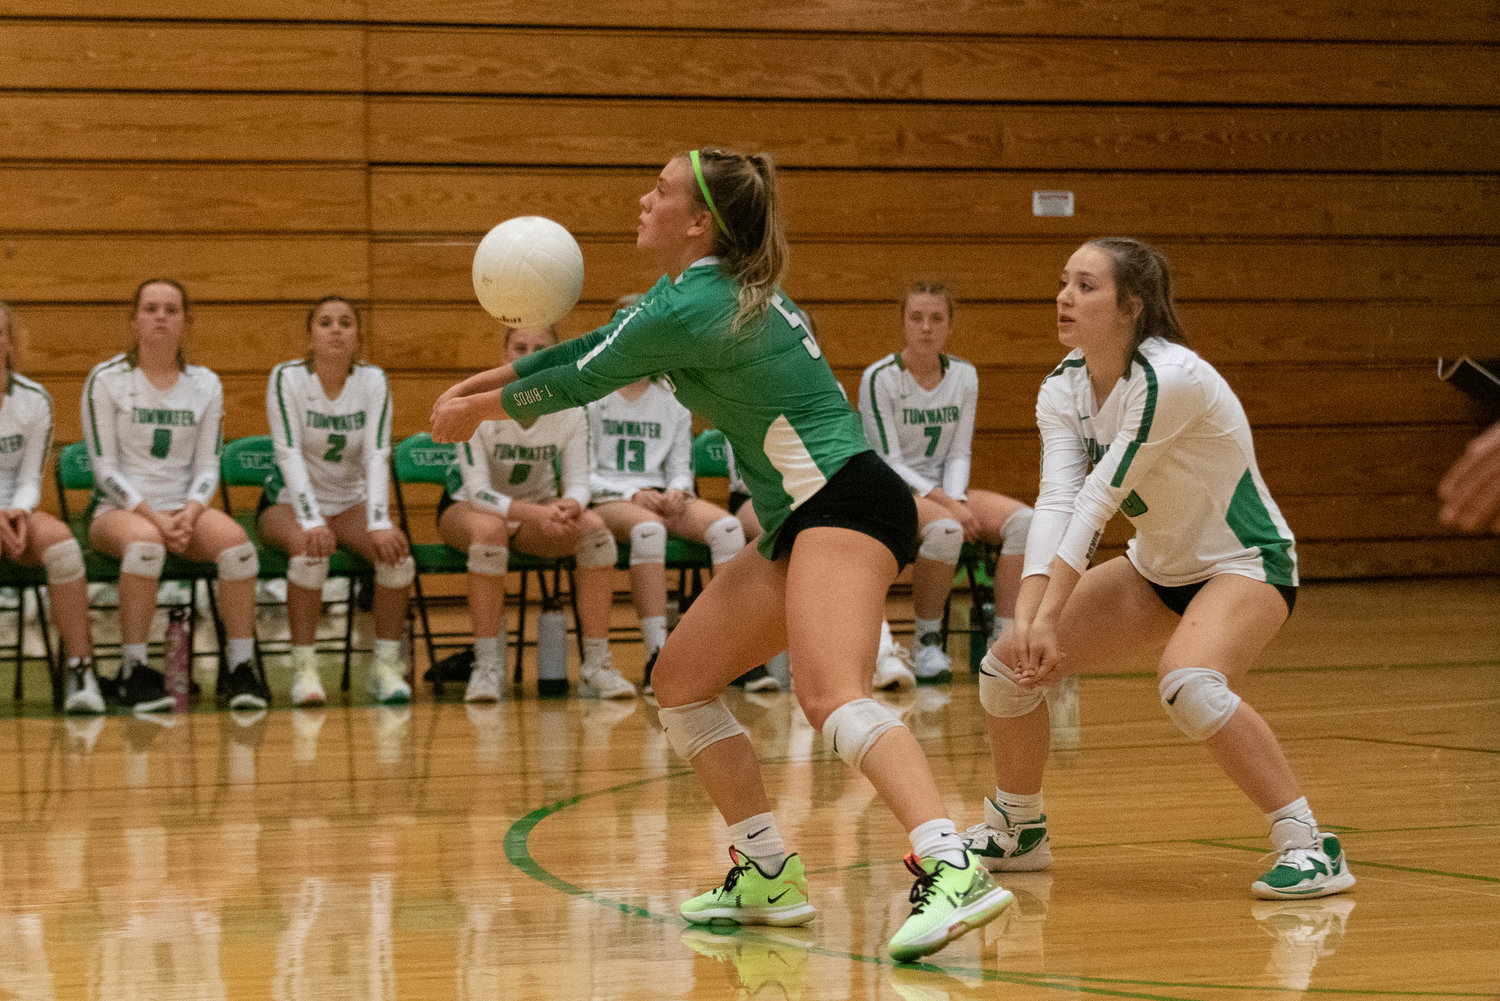 Tumwater libero Brooklynn Hayes digs the ball during the T-Birds' win over Timberline on Sept. 13.